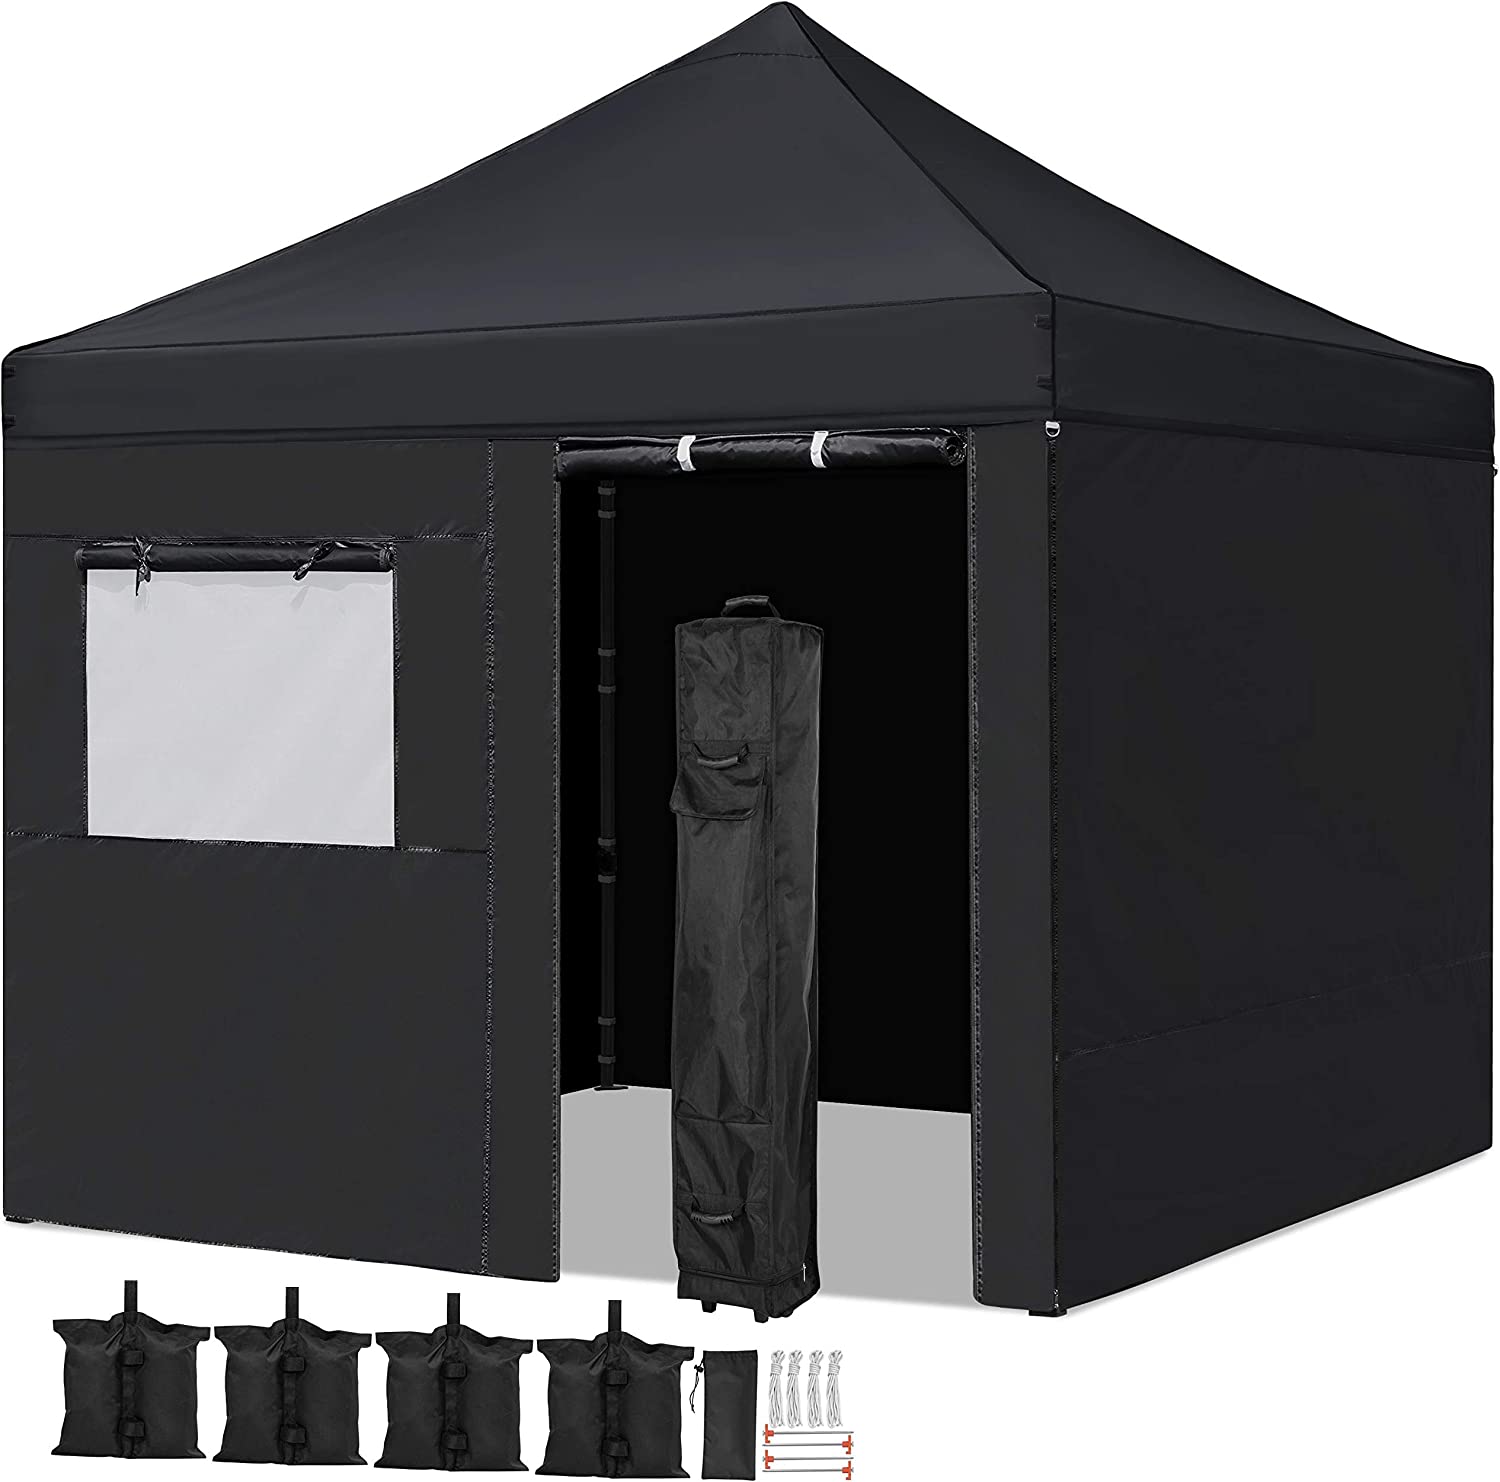 Yaheetech BPA-Free Oxford Cloth Canopy Tent With Sidewalls